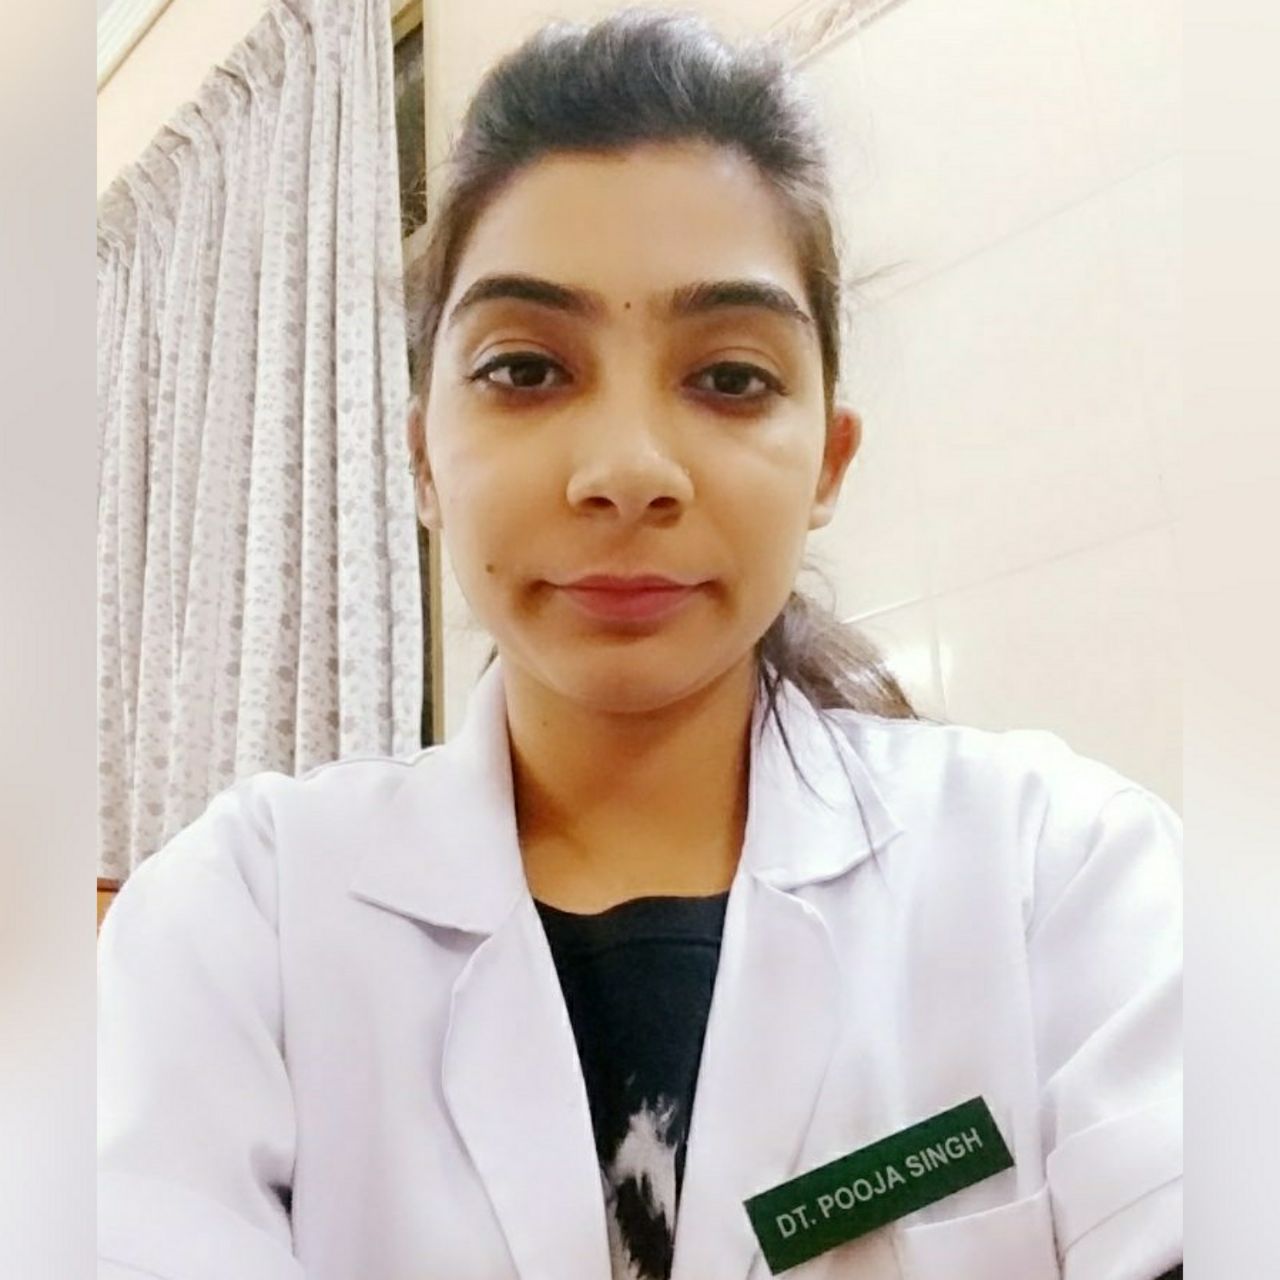 Dt. Pooja Singh from ShivKuti 4/503 Vivek khand, Gomti Nagar ,Lucknow, Uttar Pradesh, 226010, India 2 years experience in Speciality Nutrition | Diet &amp; Nutrition | Liver Specialist | Dietitian/Nutritionist | Diabetes and Metabolic disorders | Kayawell